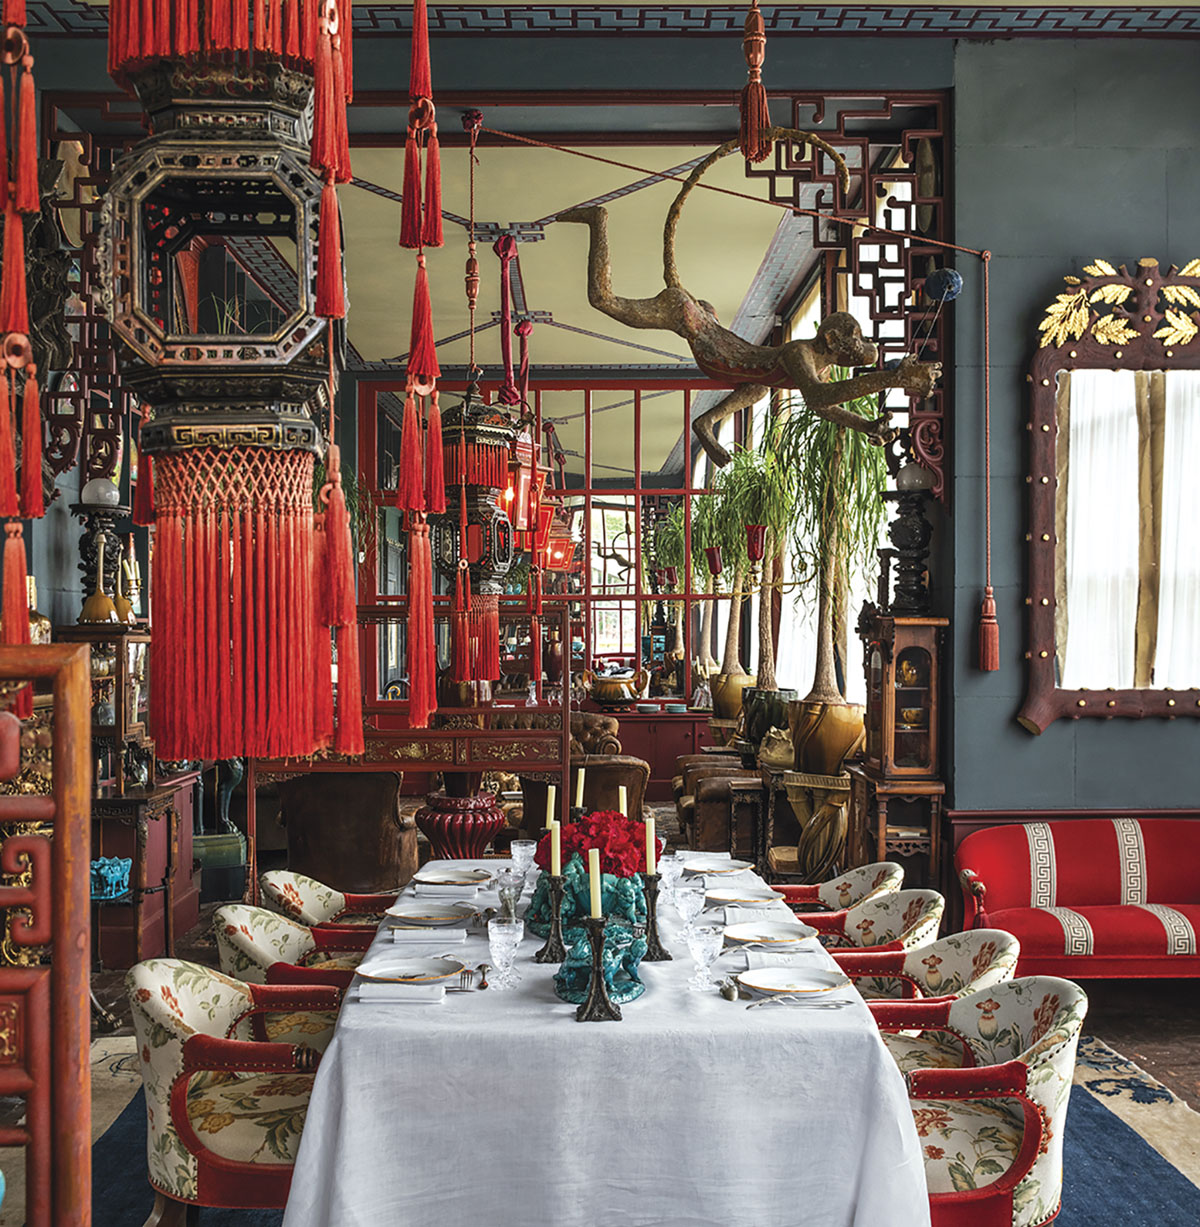 A table for 6 in a Chinese-inspired dining room. The primary color is dusty blue with bright red accents. From the pages of Be My Guest by Pierre Sauvage and Olivia Roland